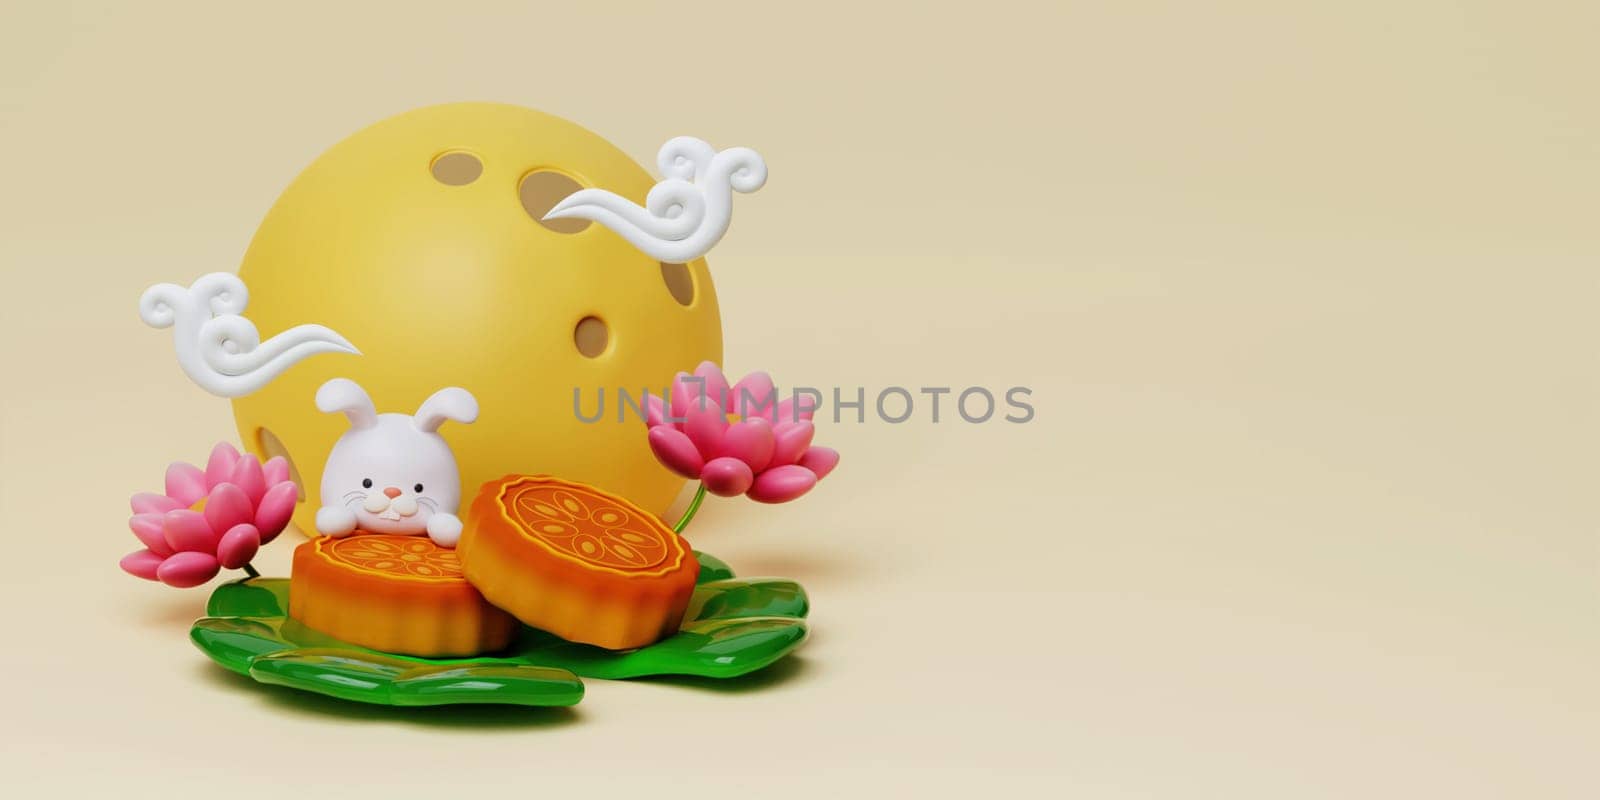 3d cute rabbits on baked mooncake with lotus and full moon on yellow background. Chinese palace aside. Translation: Happy mid autumn festival. 3d render.